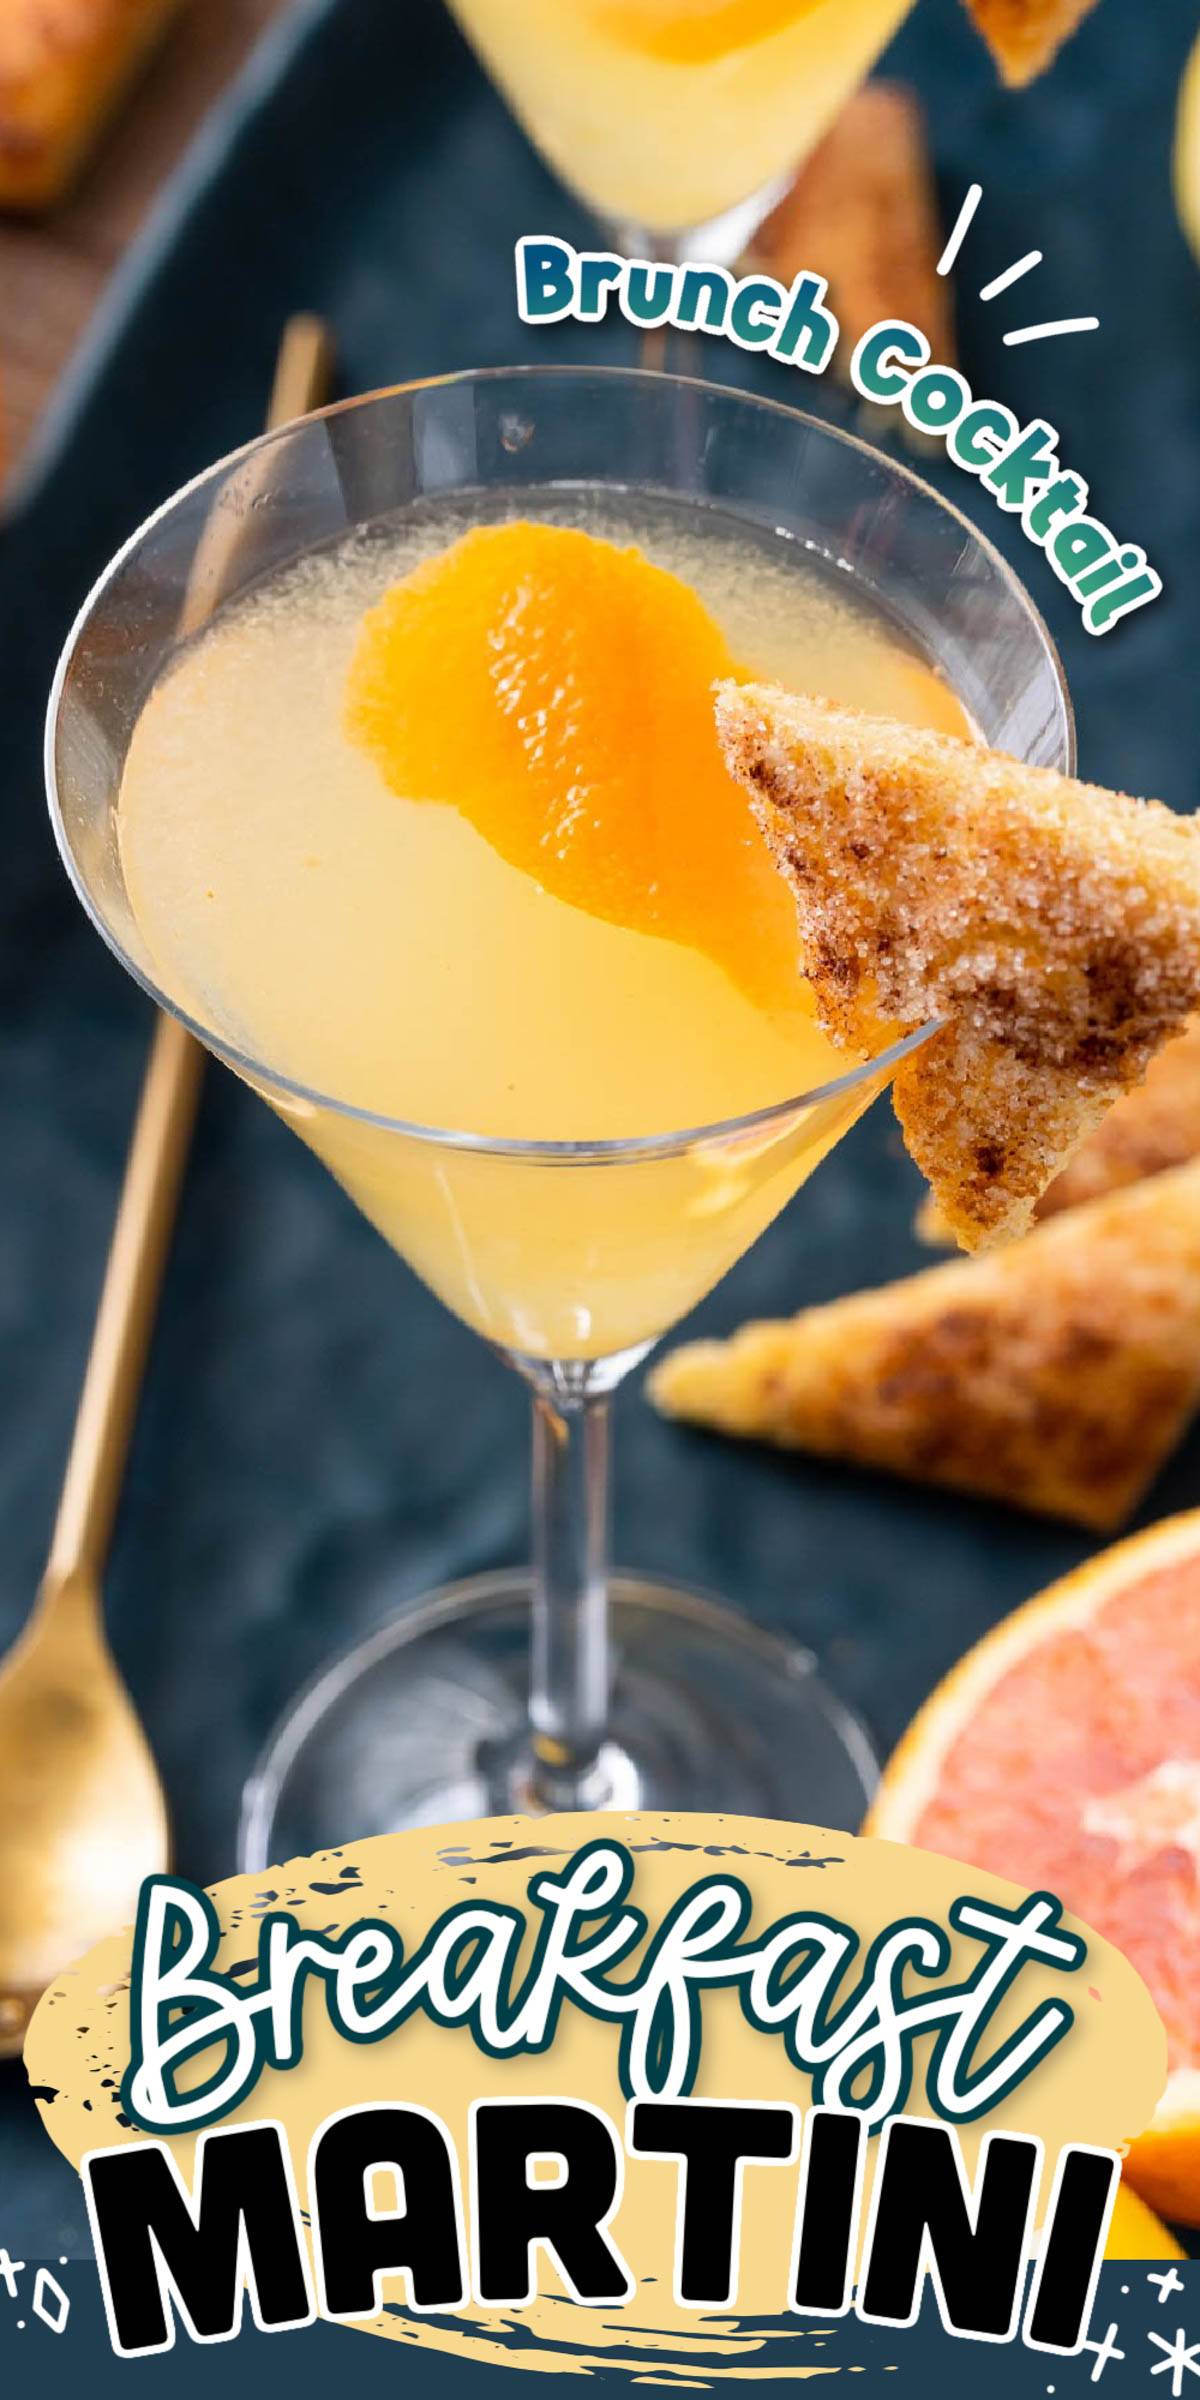 This Breakfast Martini is the perfect sipping cocktail that's sweet and citrusy while also being beautiful balanced and flavorful!  via @sugarandsoulco